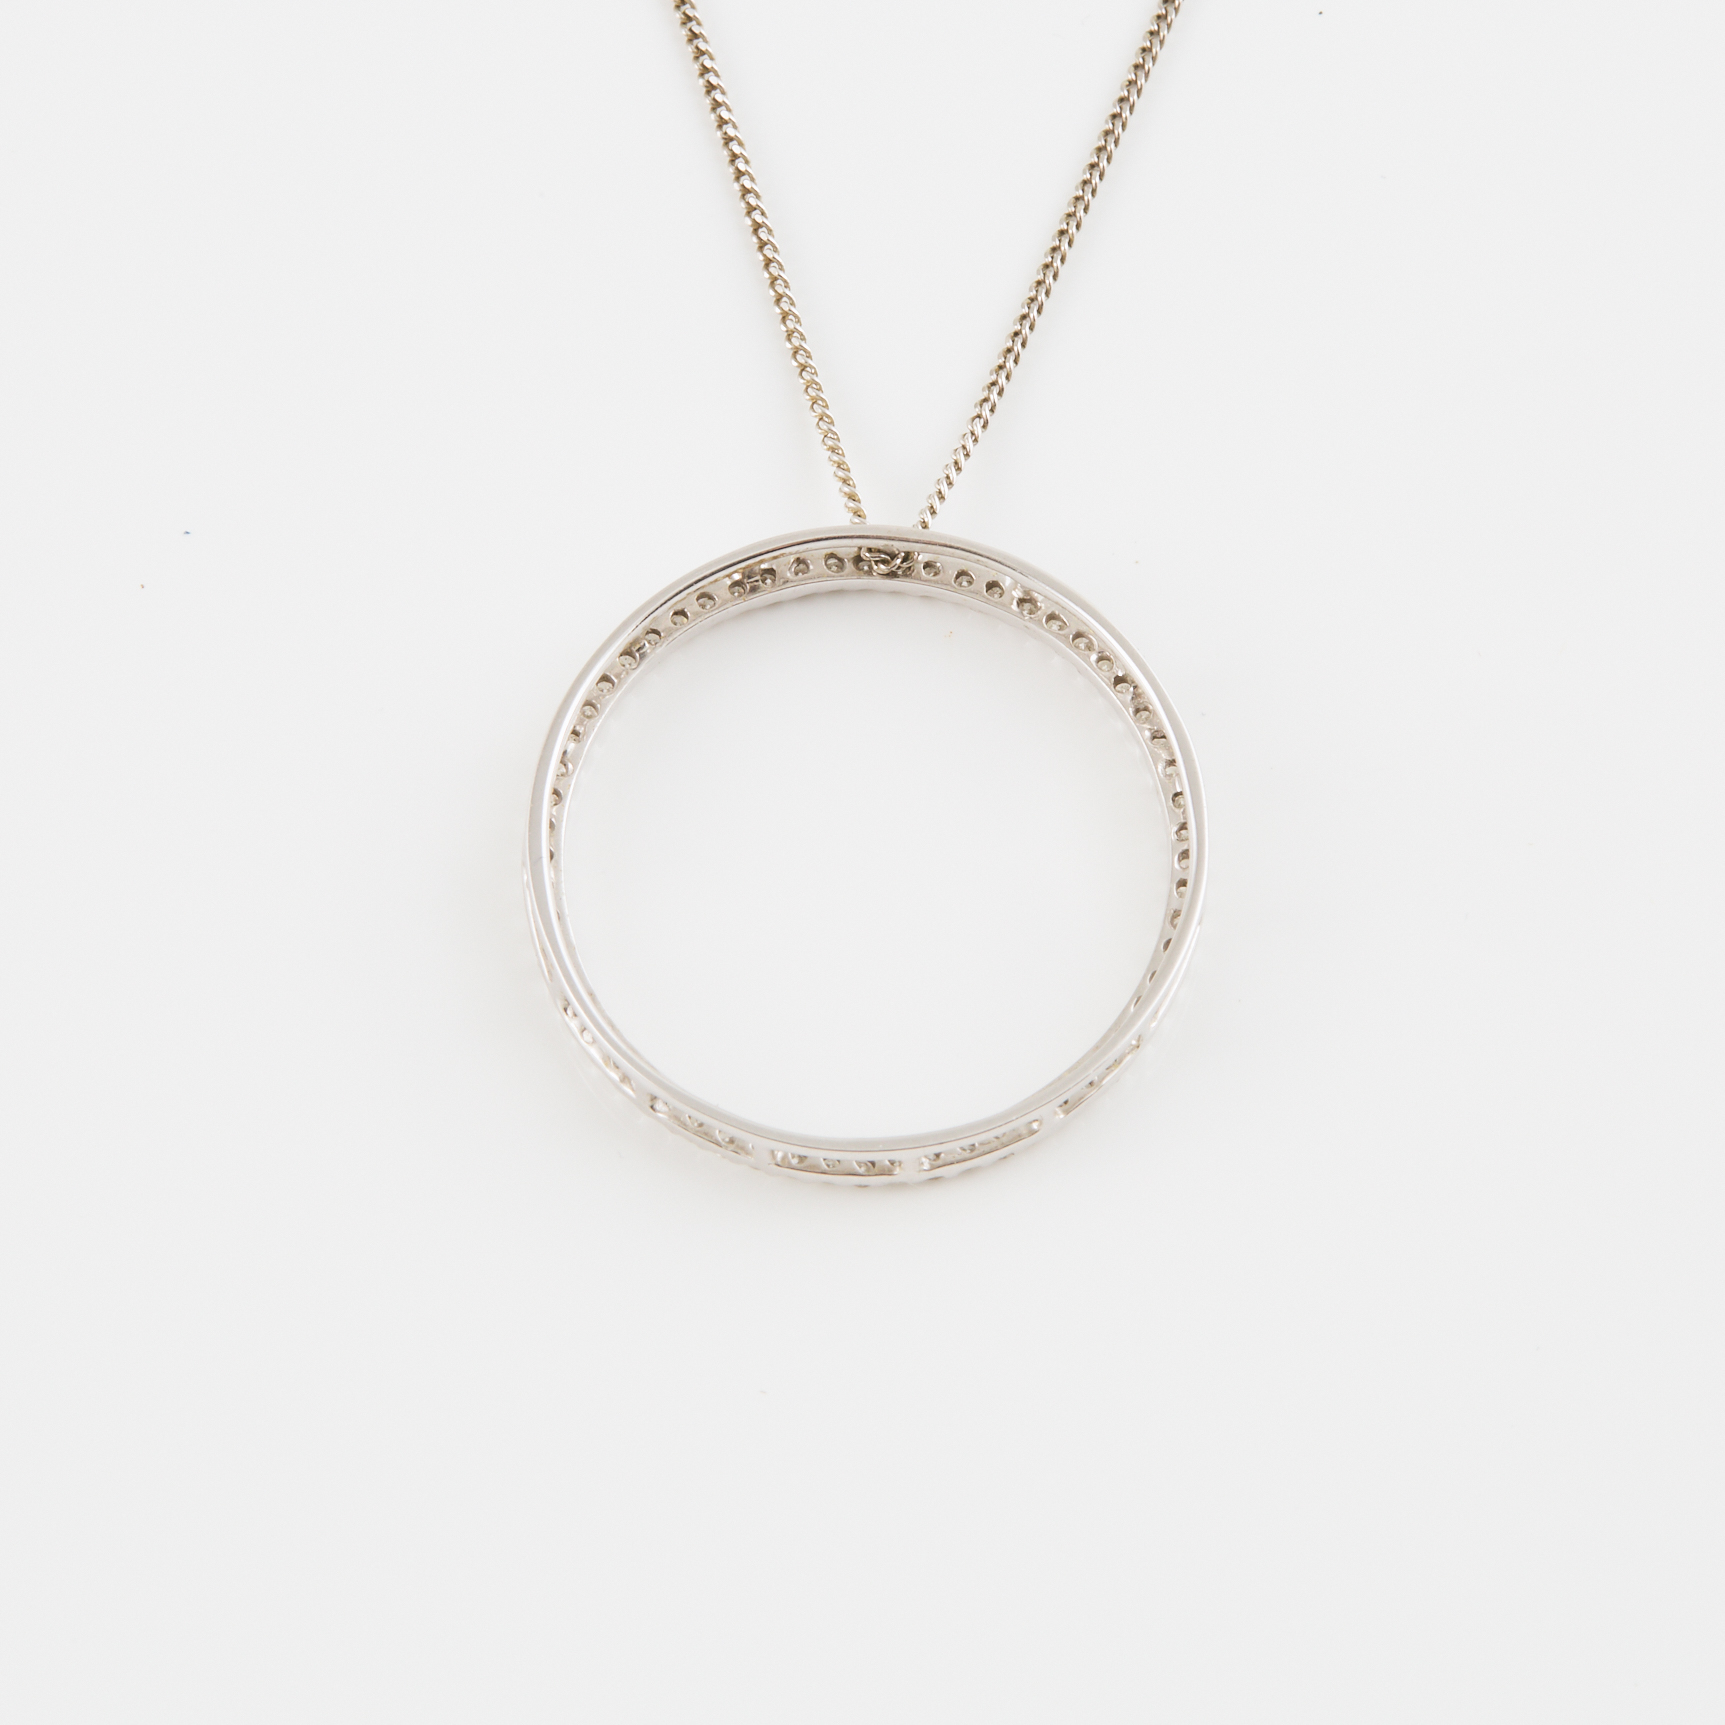 10k White Gold Circular Pendant And Chain